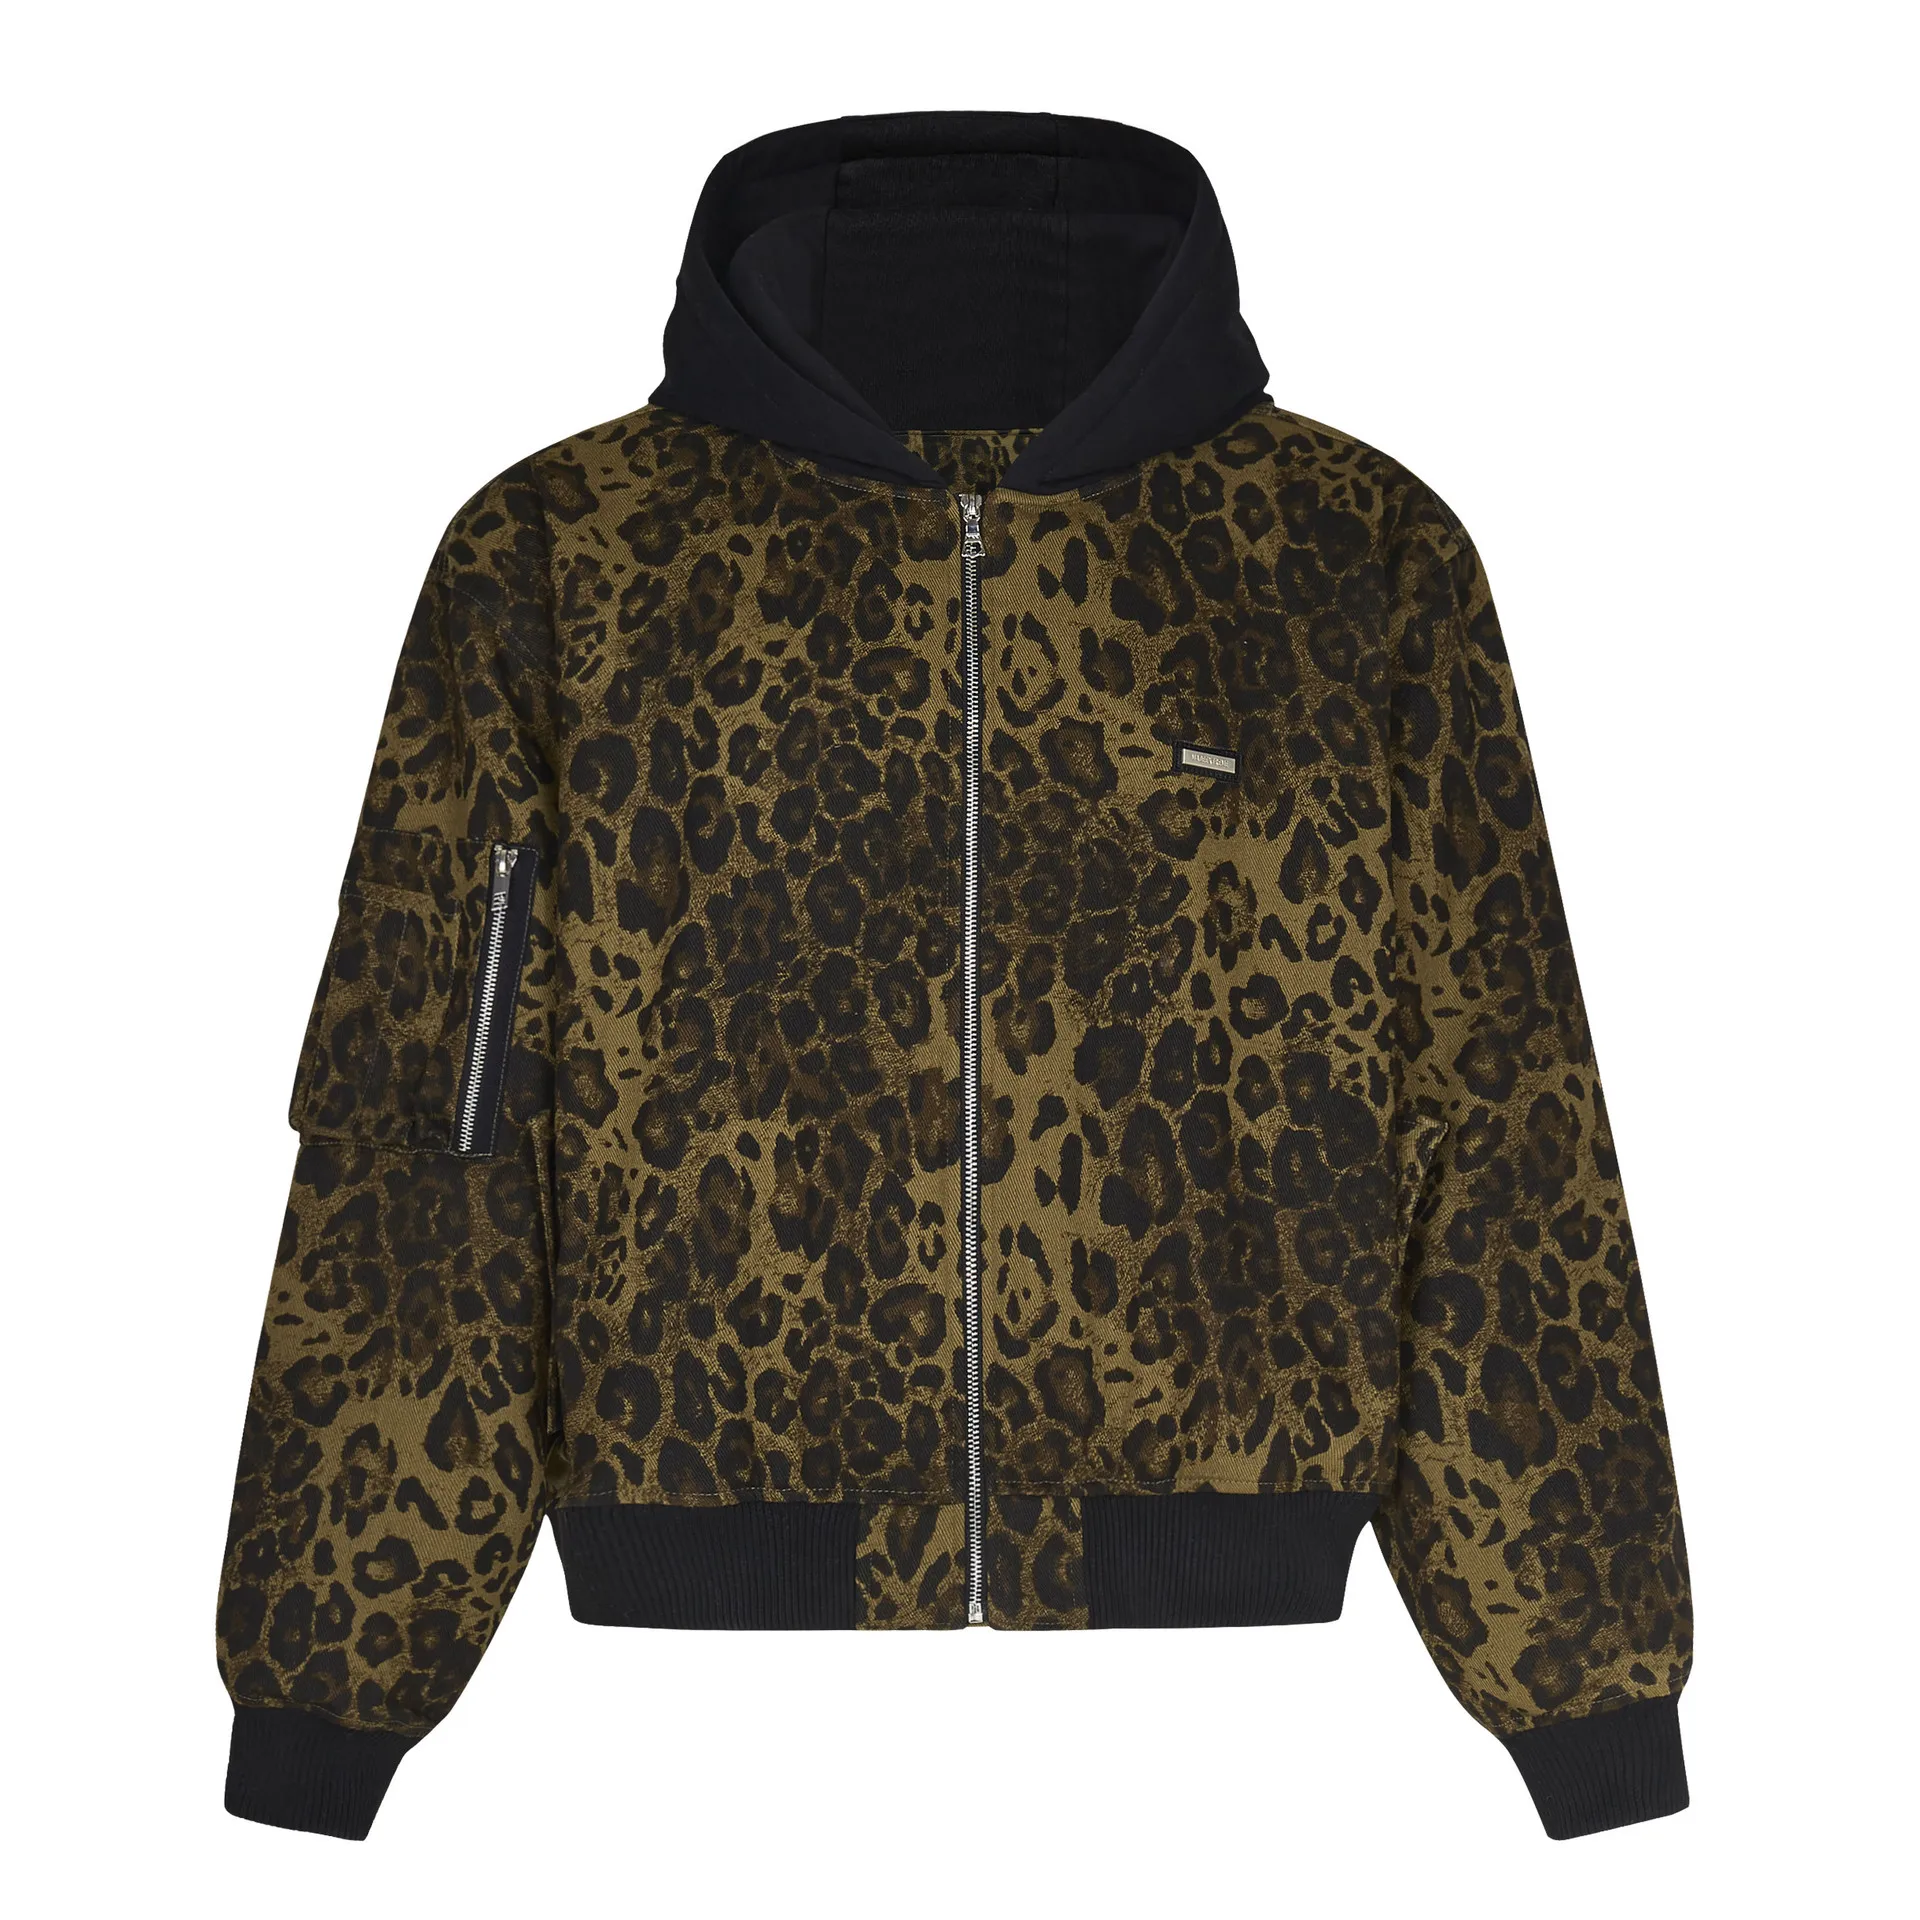 

MADEEXTREME Leopard Bomber Jacket Color Block Hooded Jacket Warm and Thick Coat for Men Motorcycle Jacket Unisex